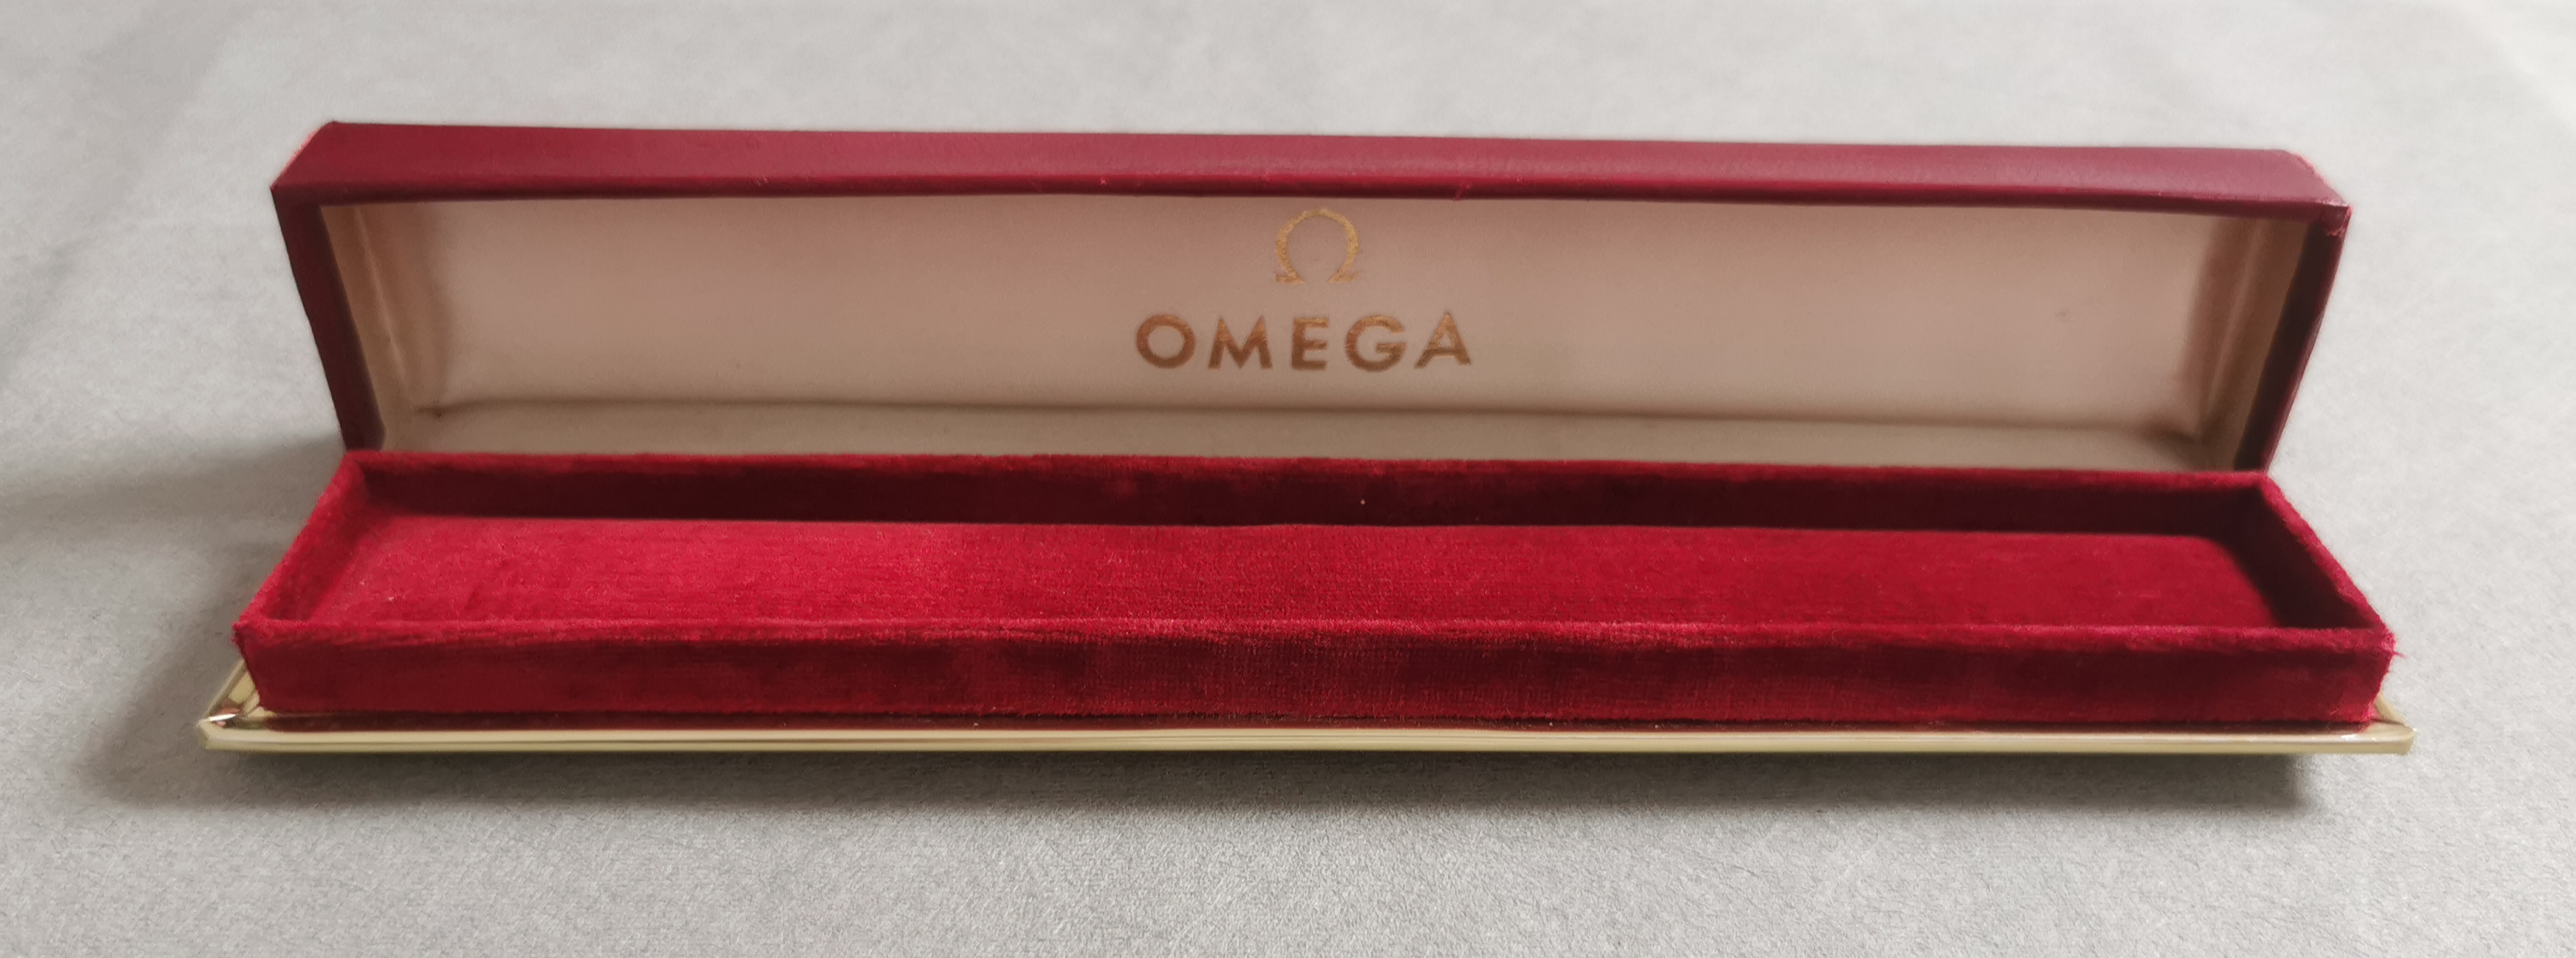 Omega vintage watch box leather red for women models good condition T1 | San Giorgio a Cremano